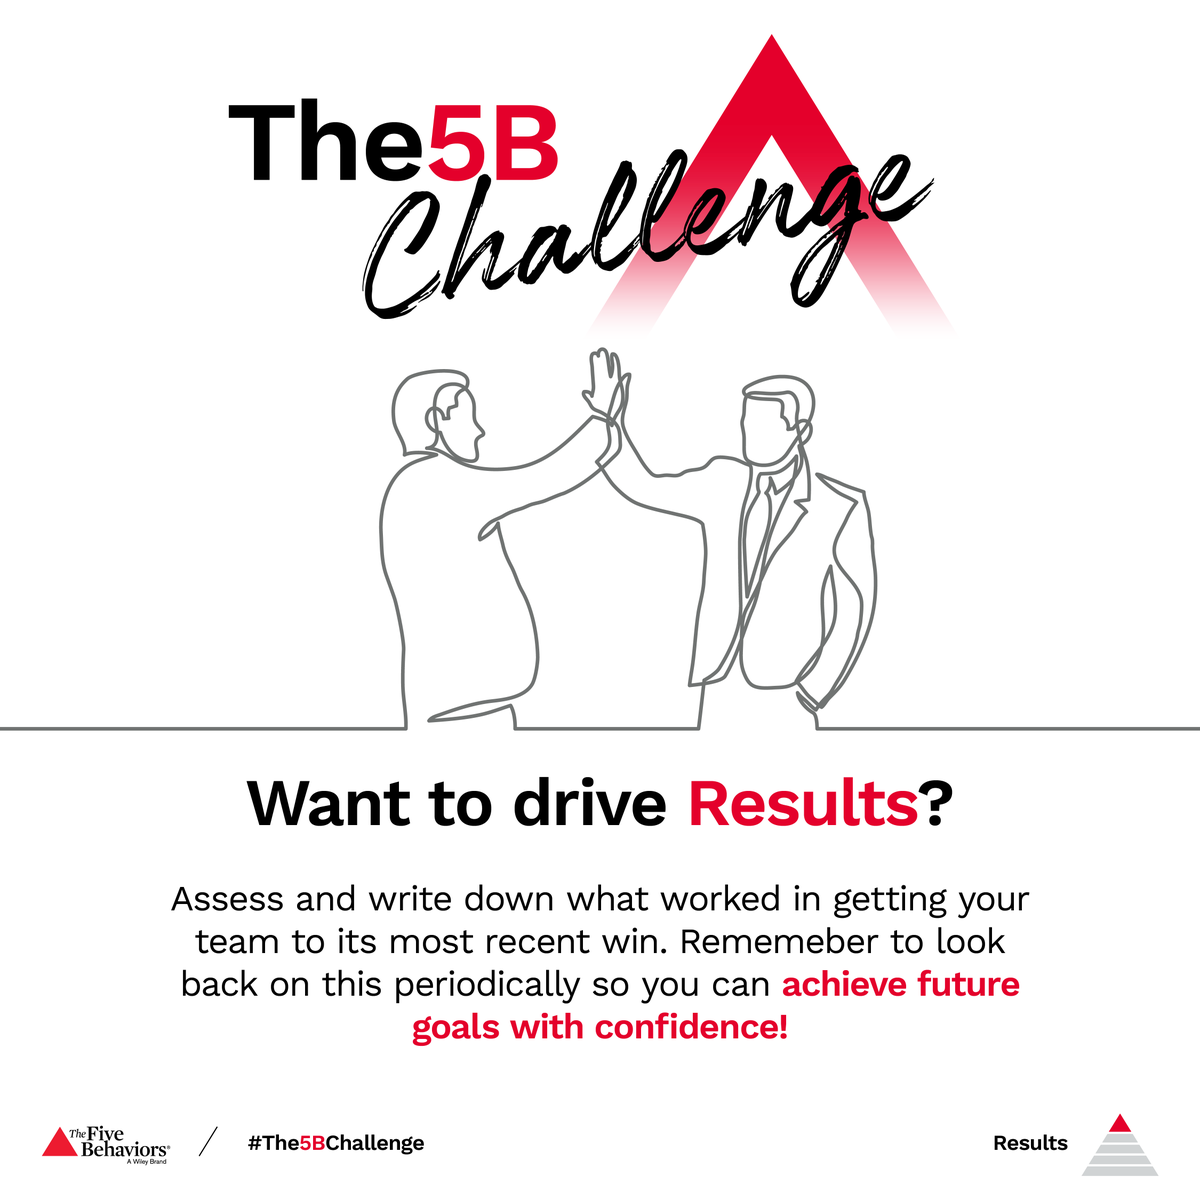 A team that is not focused on results fails to grow, rarely defeats competitors, and even loses achievement-oriented employees. Take #The5BChallenge with your team to actively drive results!